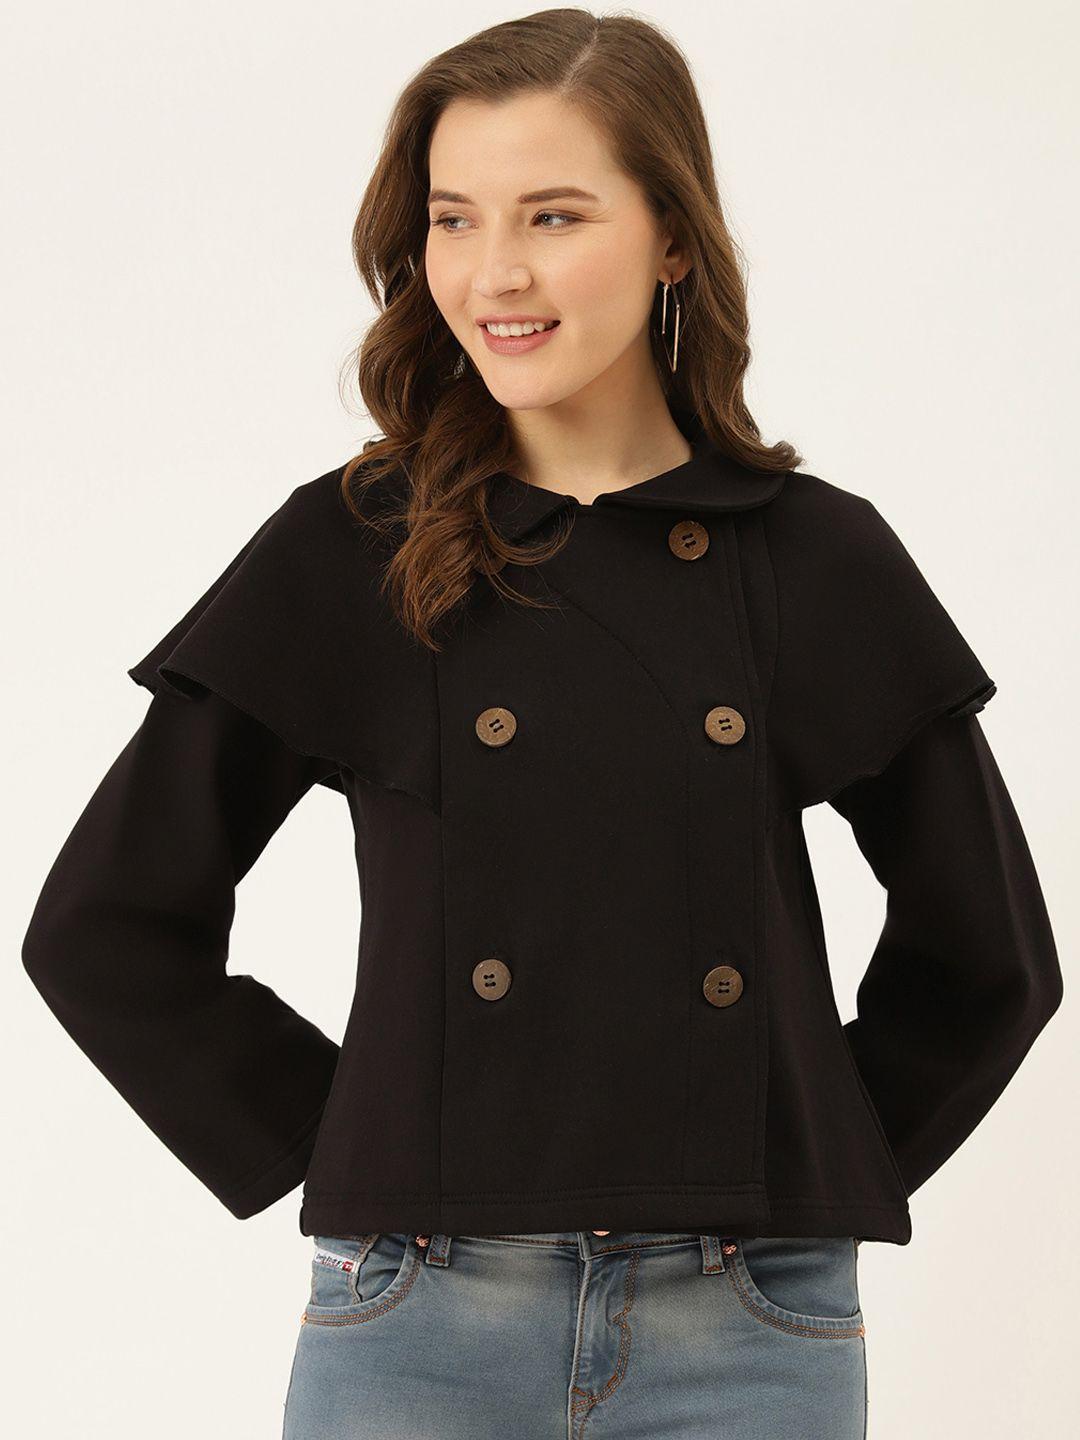 the-dry-state-women-black-solid-cape-style-tailored-jacket